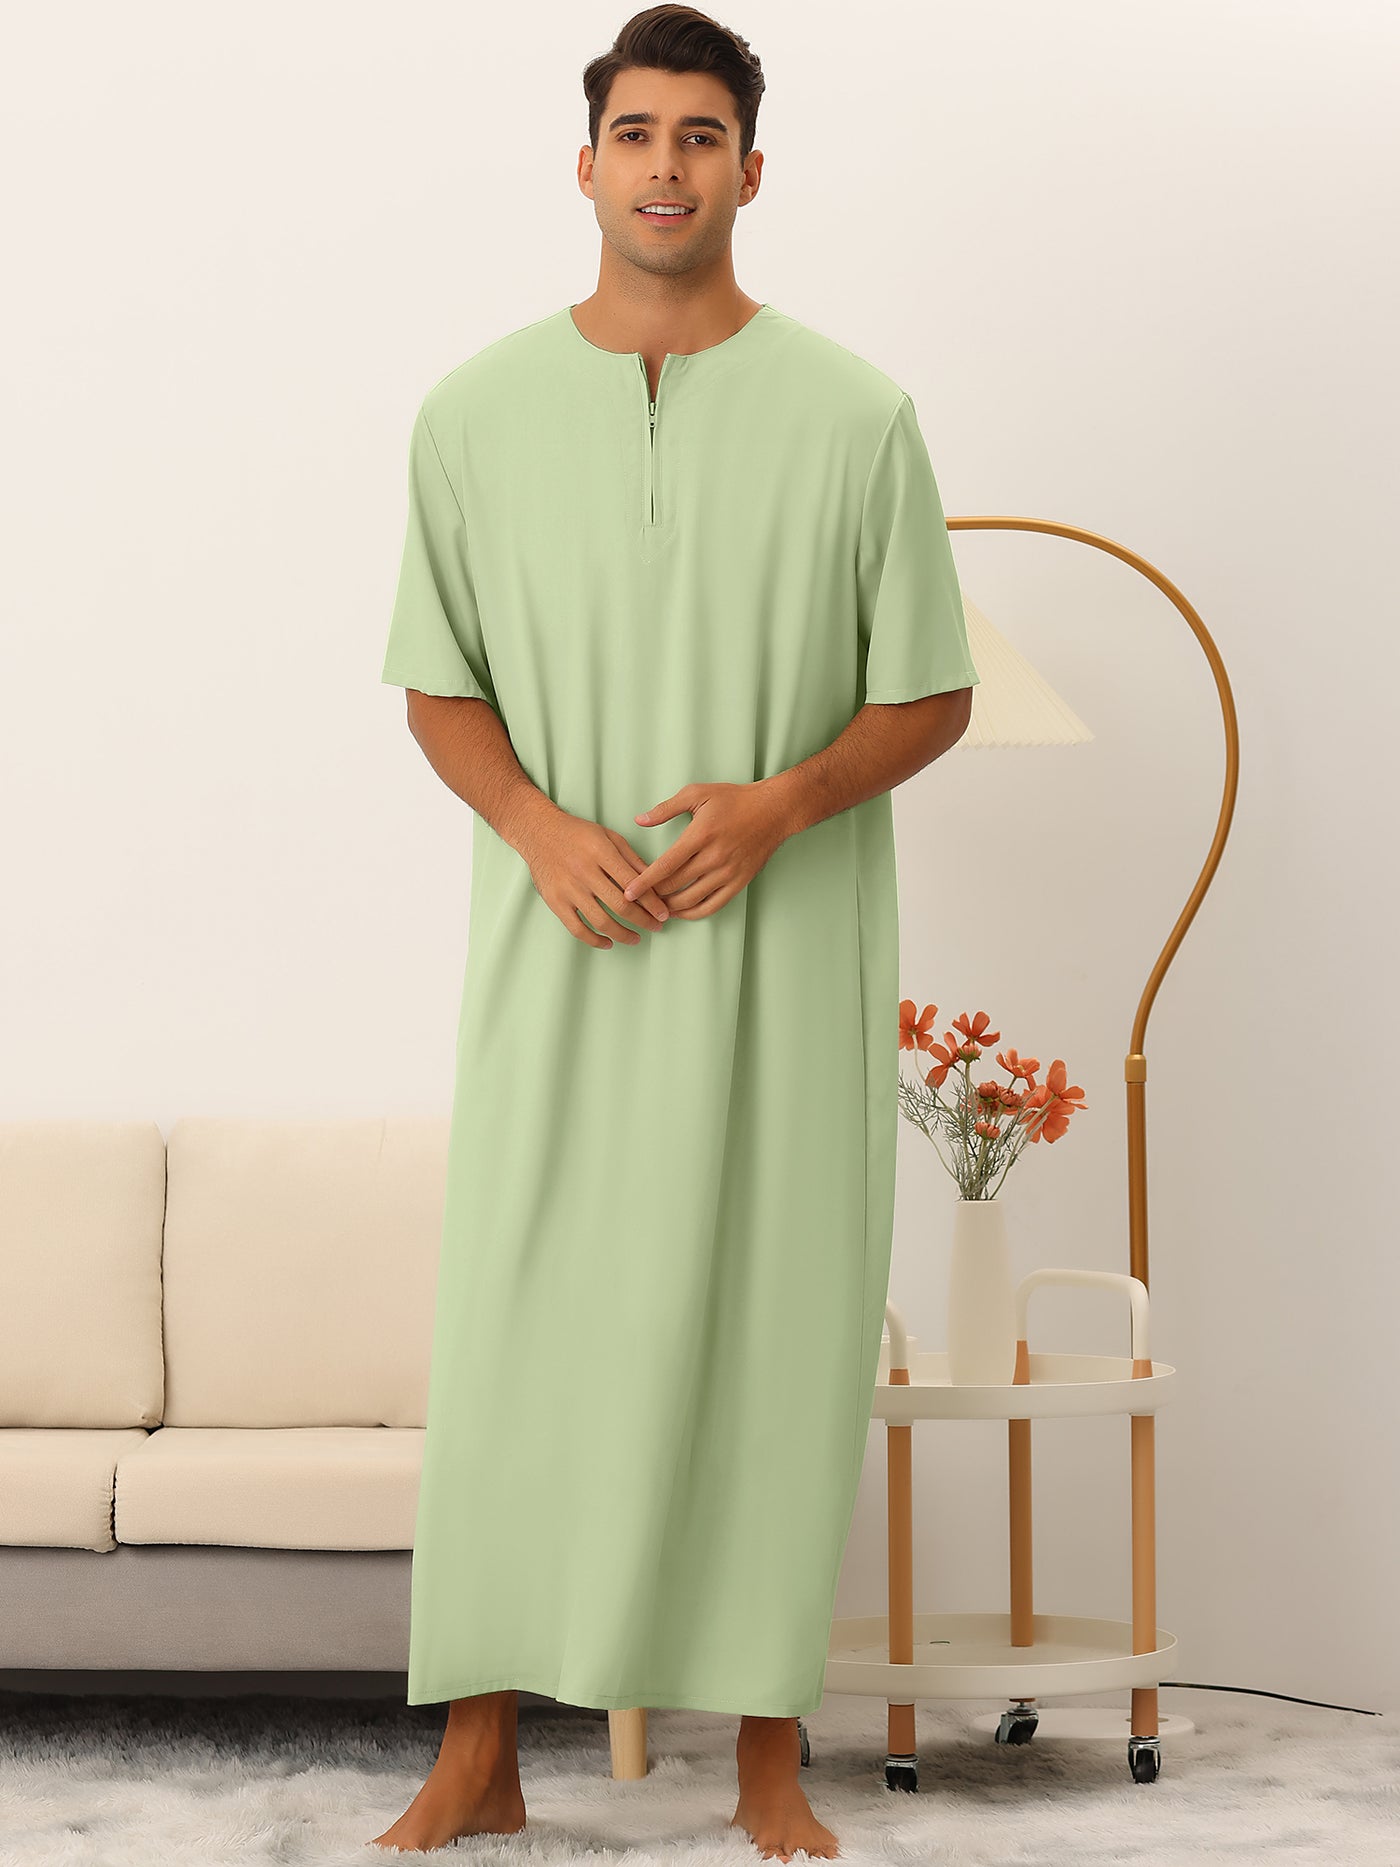 Bublédon Men's Solid Color Nightshirts Short Sleeve Zipper Loose Fit Pajamas Nightgown